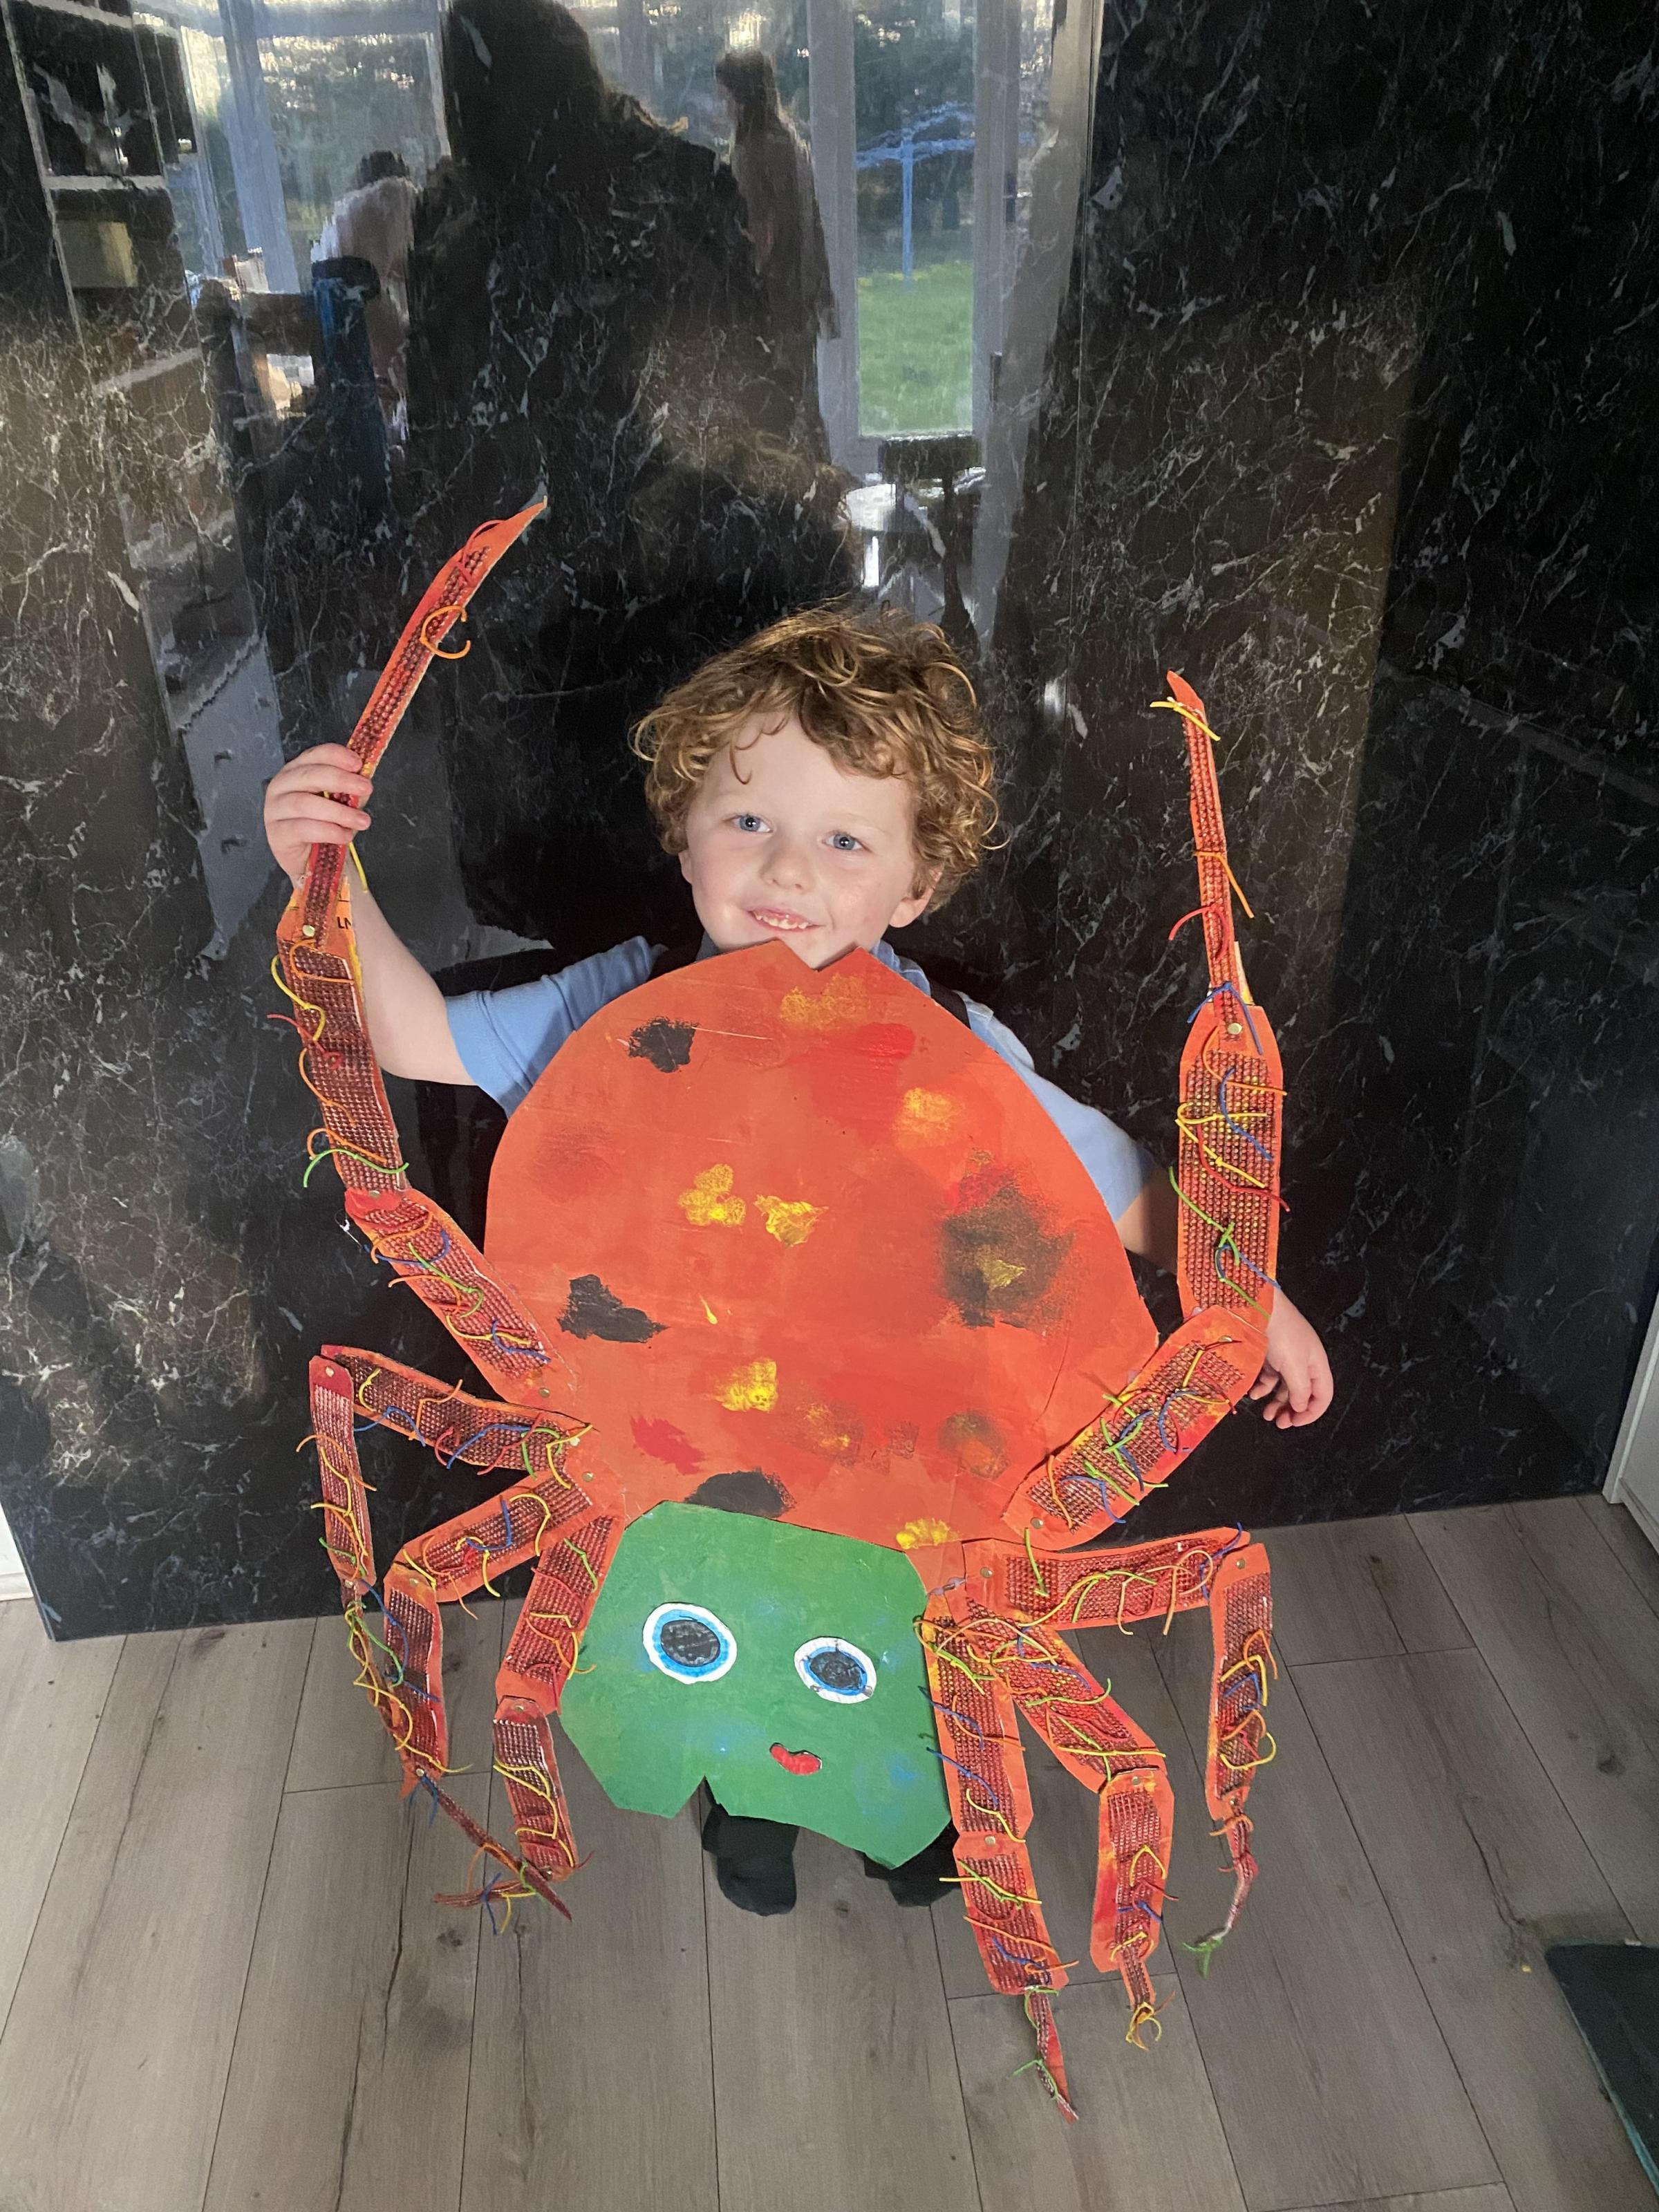 Five-year-old Daxton Cook as The very busy spider